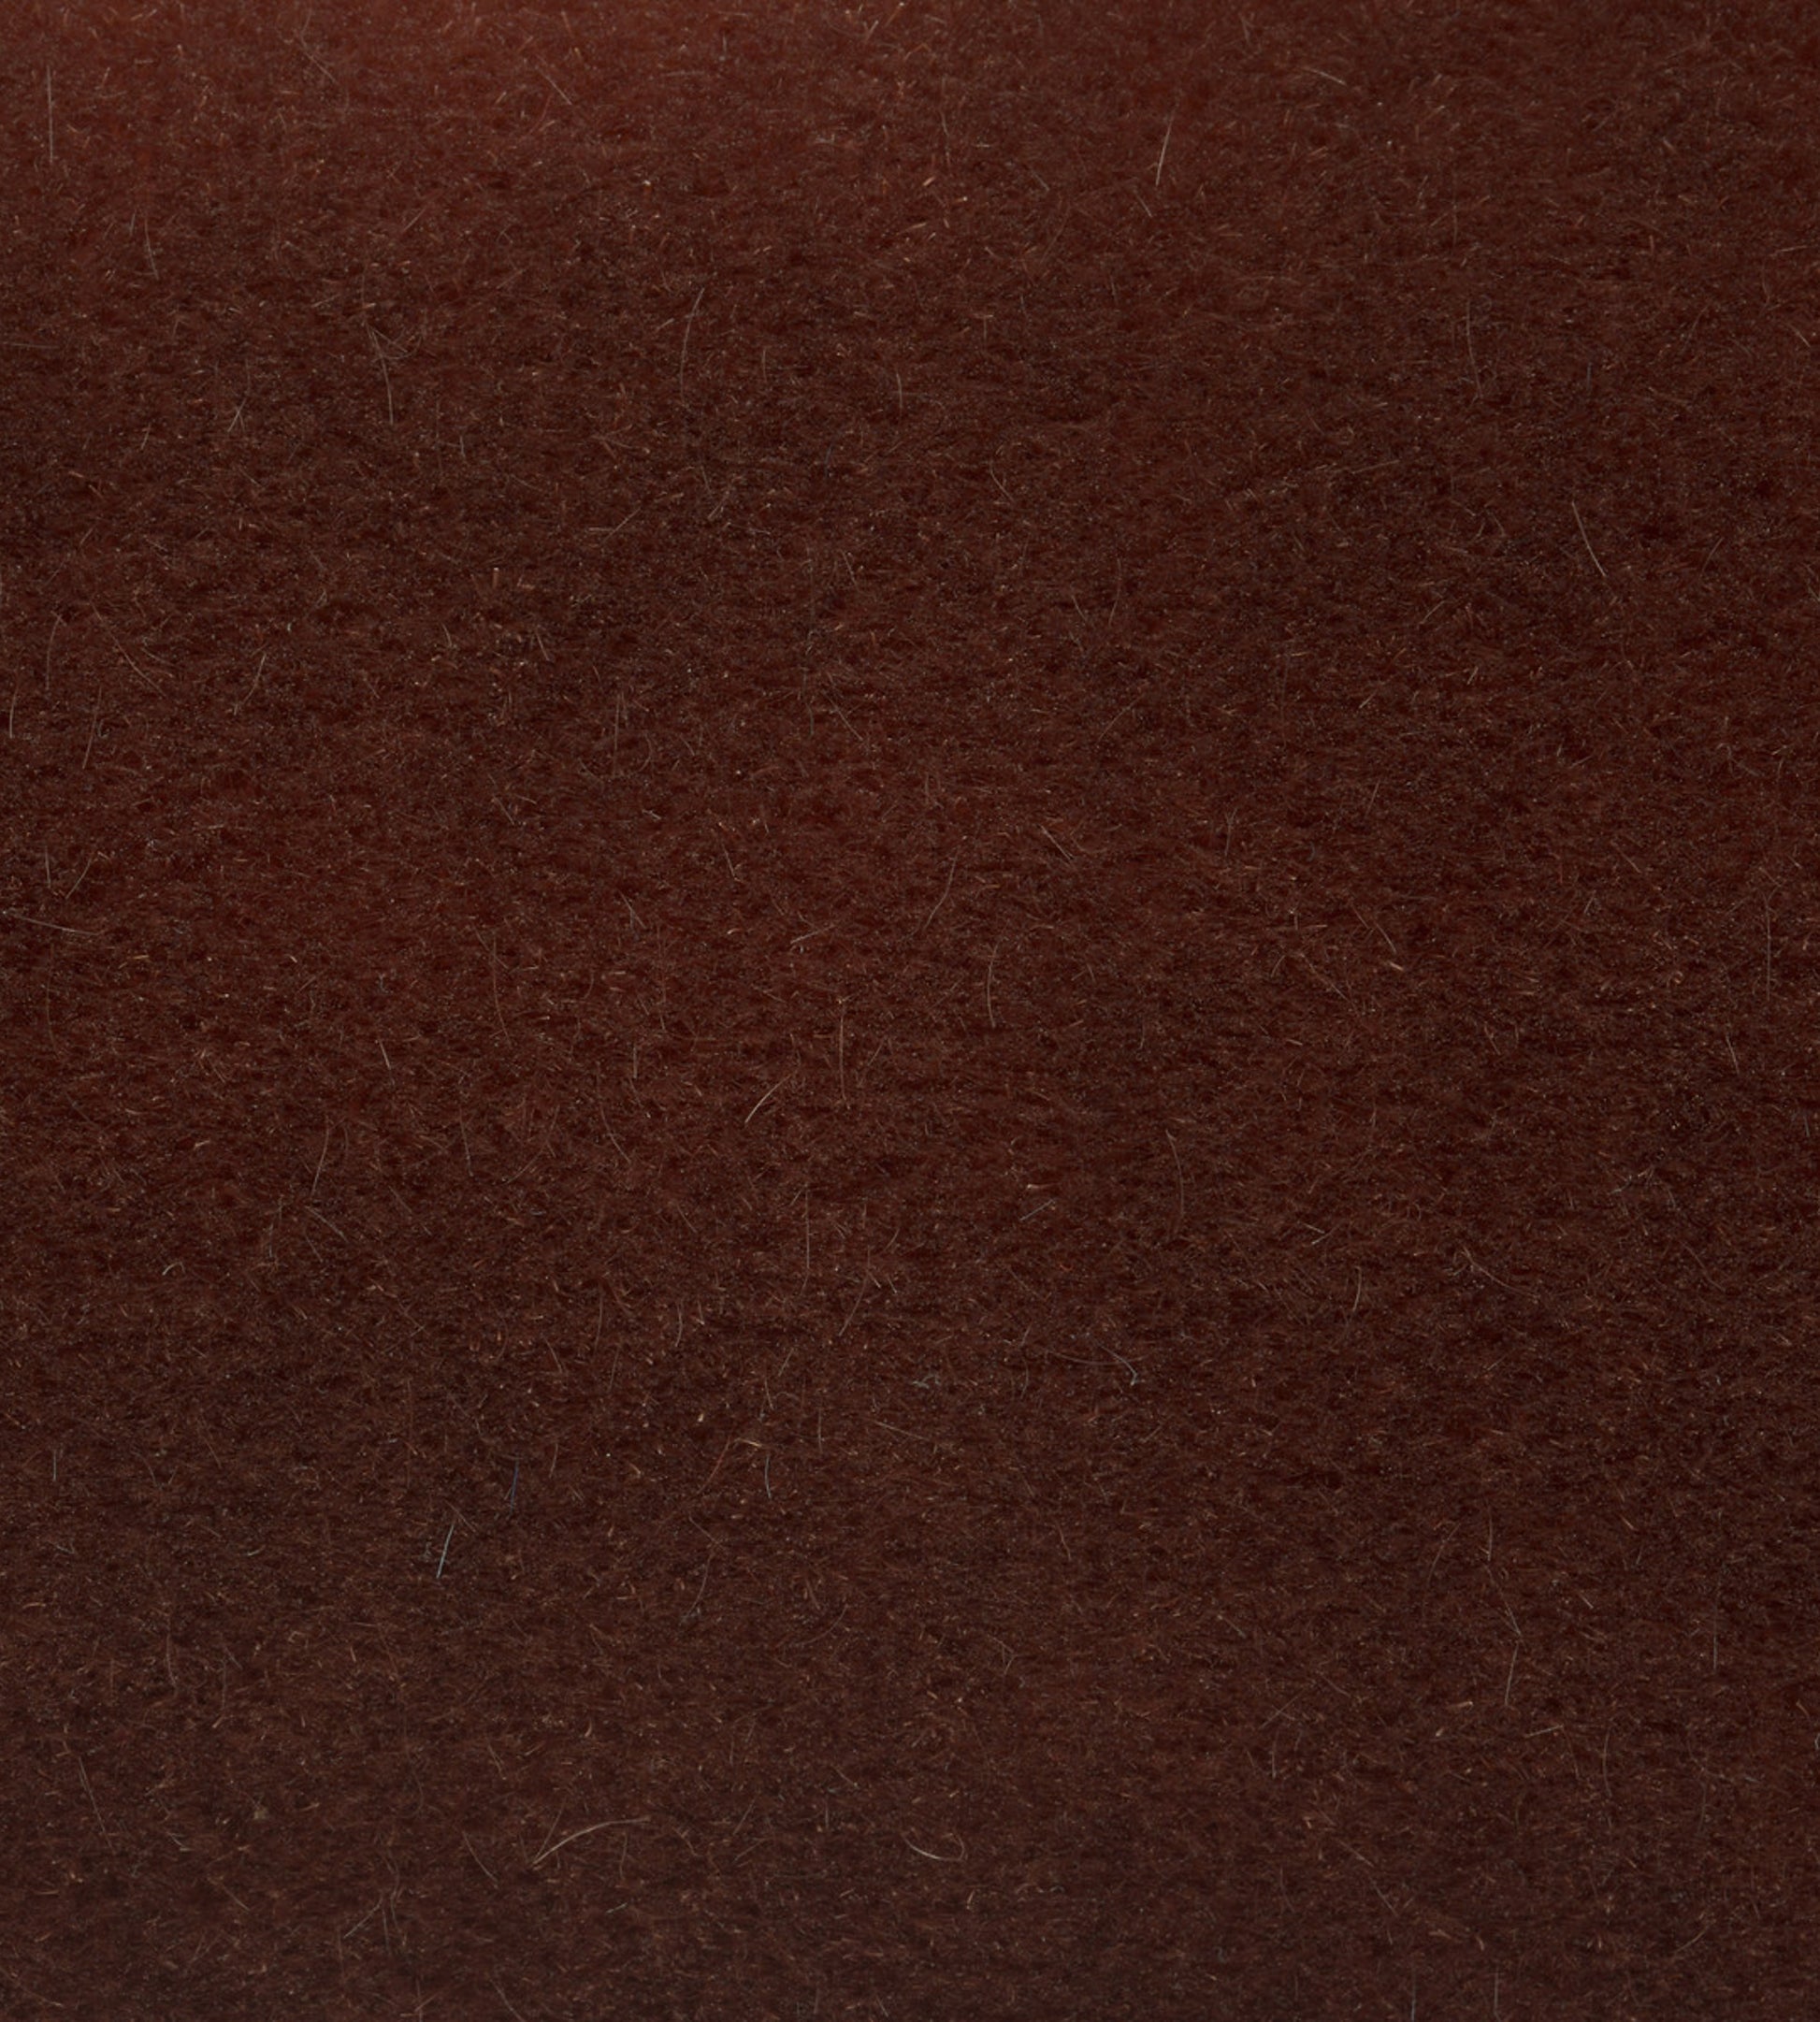 Purchase Old World Weavers Fabric Pattern number VP 0144MAJE, Majestic Mohair Brick Dust 1